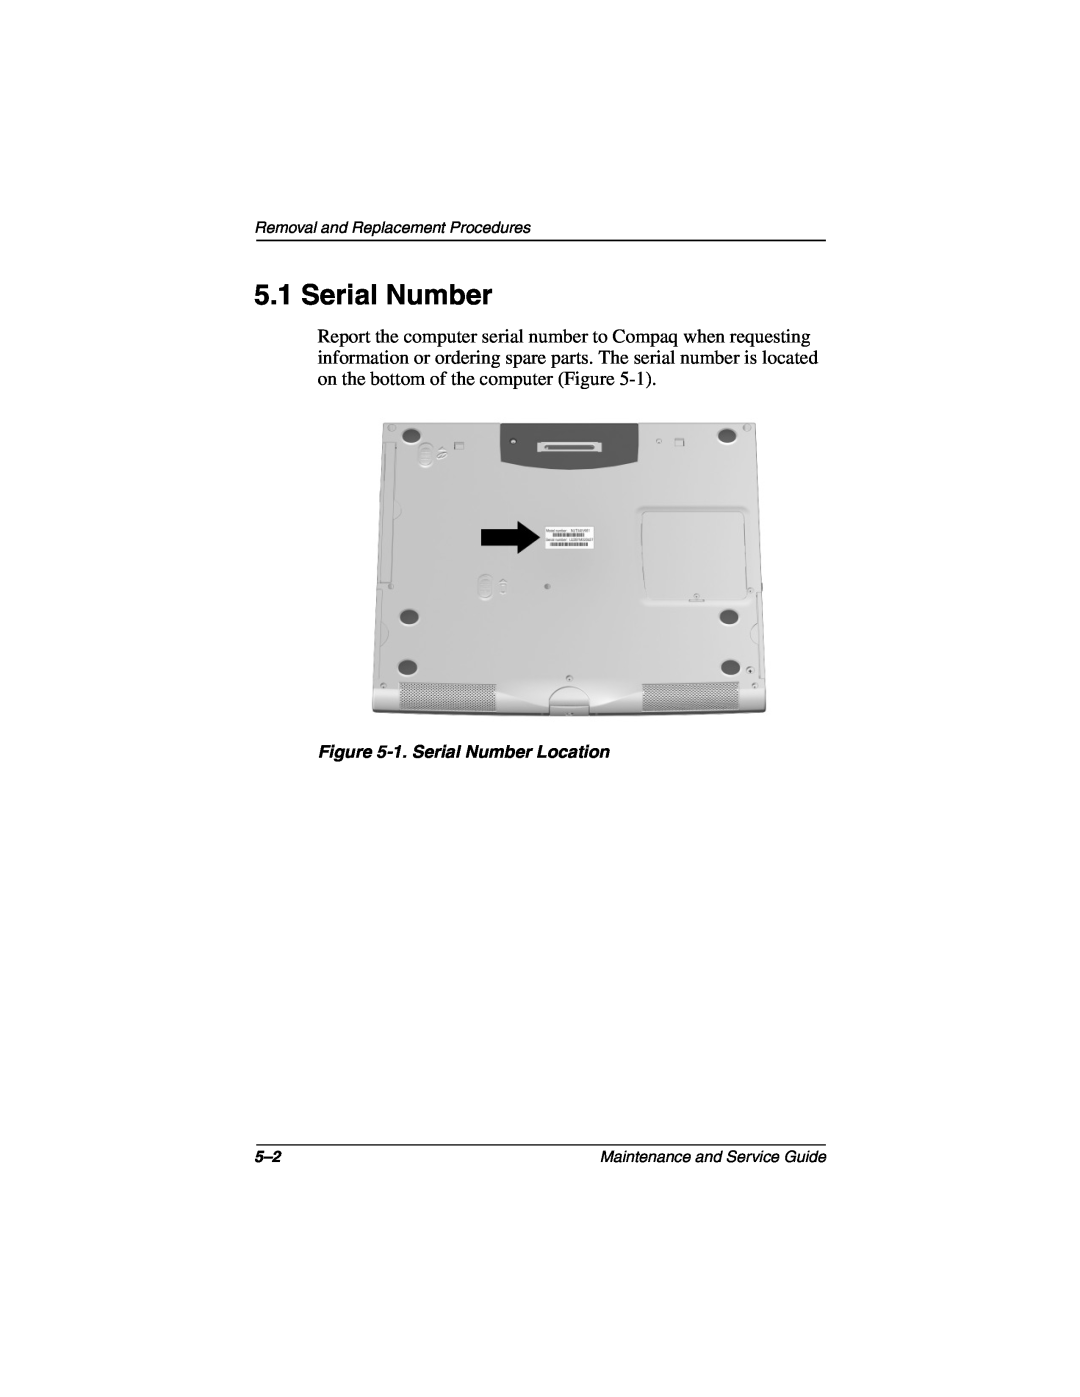 Compaq N160 manual 1. Serial Number Location, Removal and Replacement Procedures, Maintenance and Service Guide 